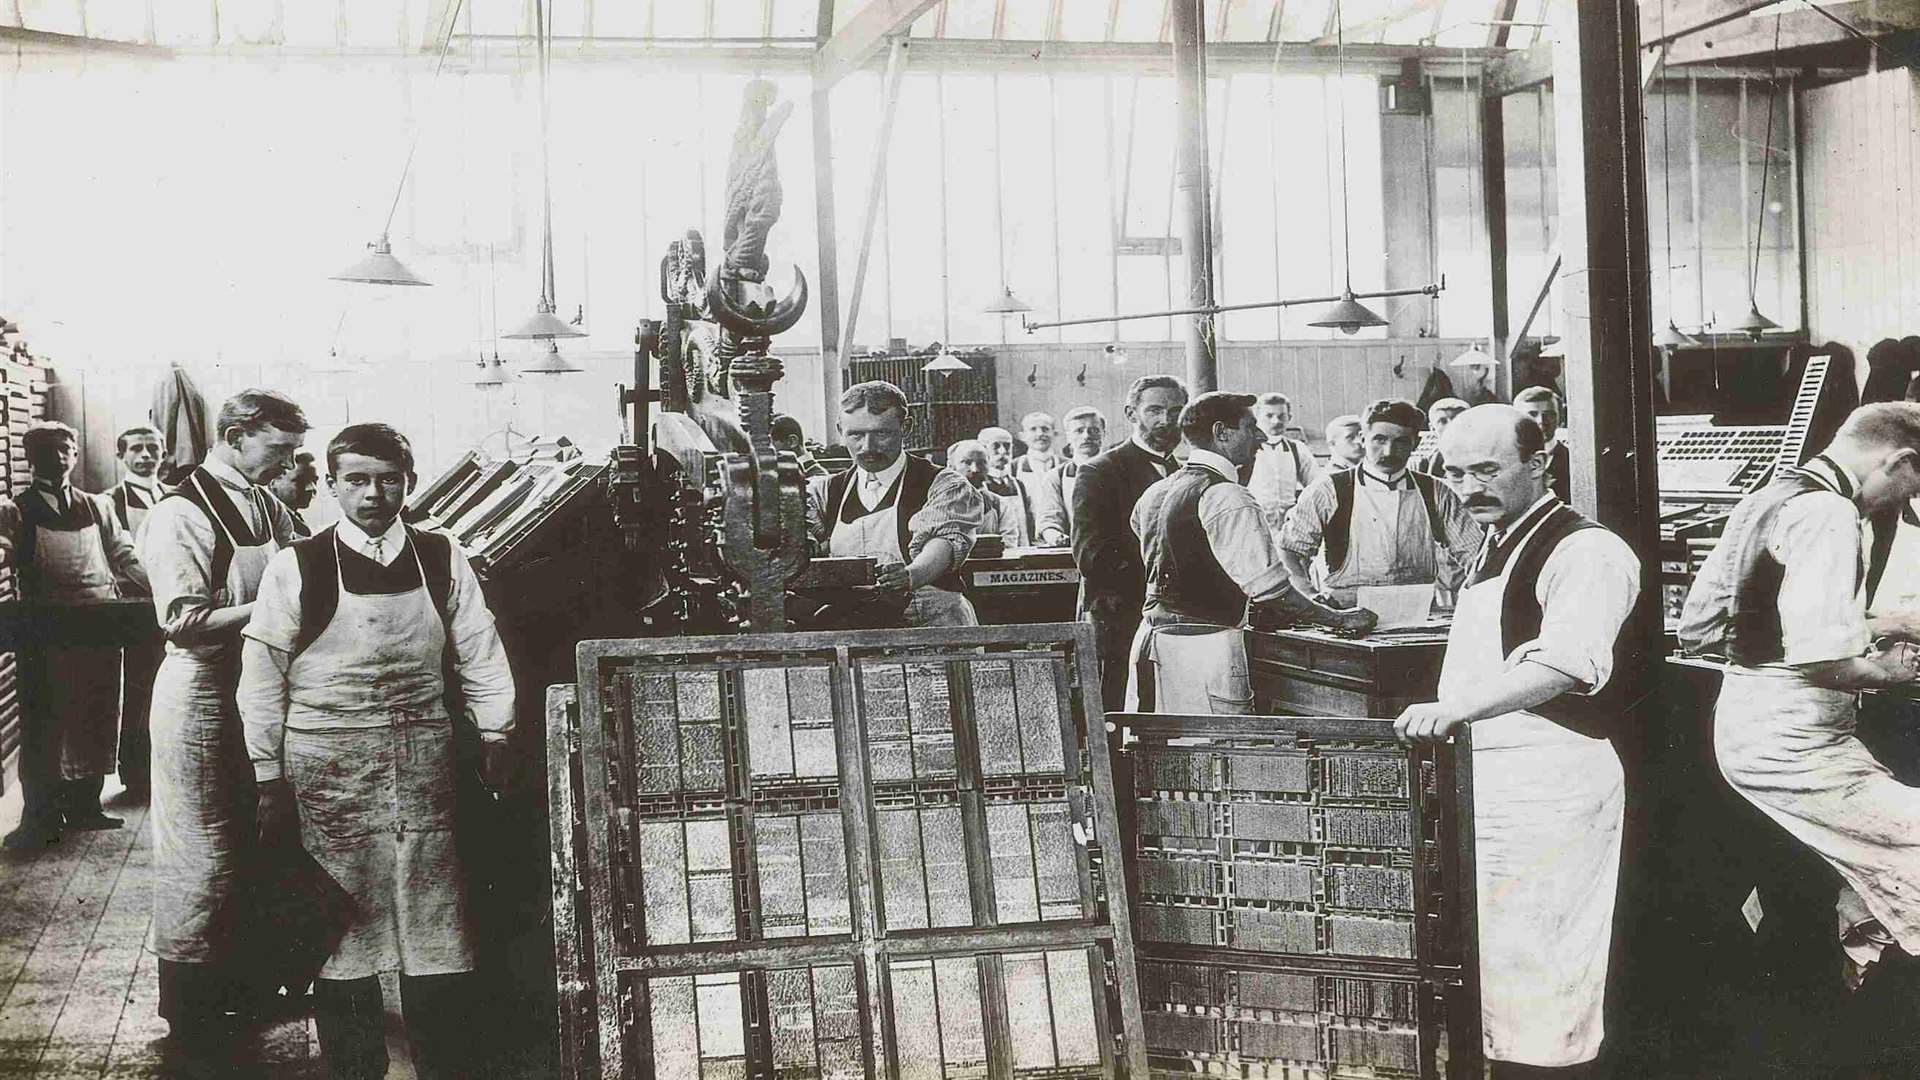 Compositors at work in the Headley Brothers print shop in the early 20th century